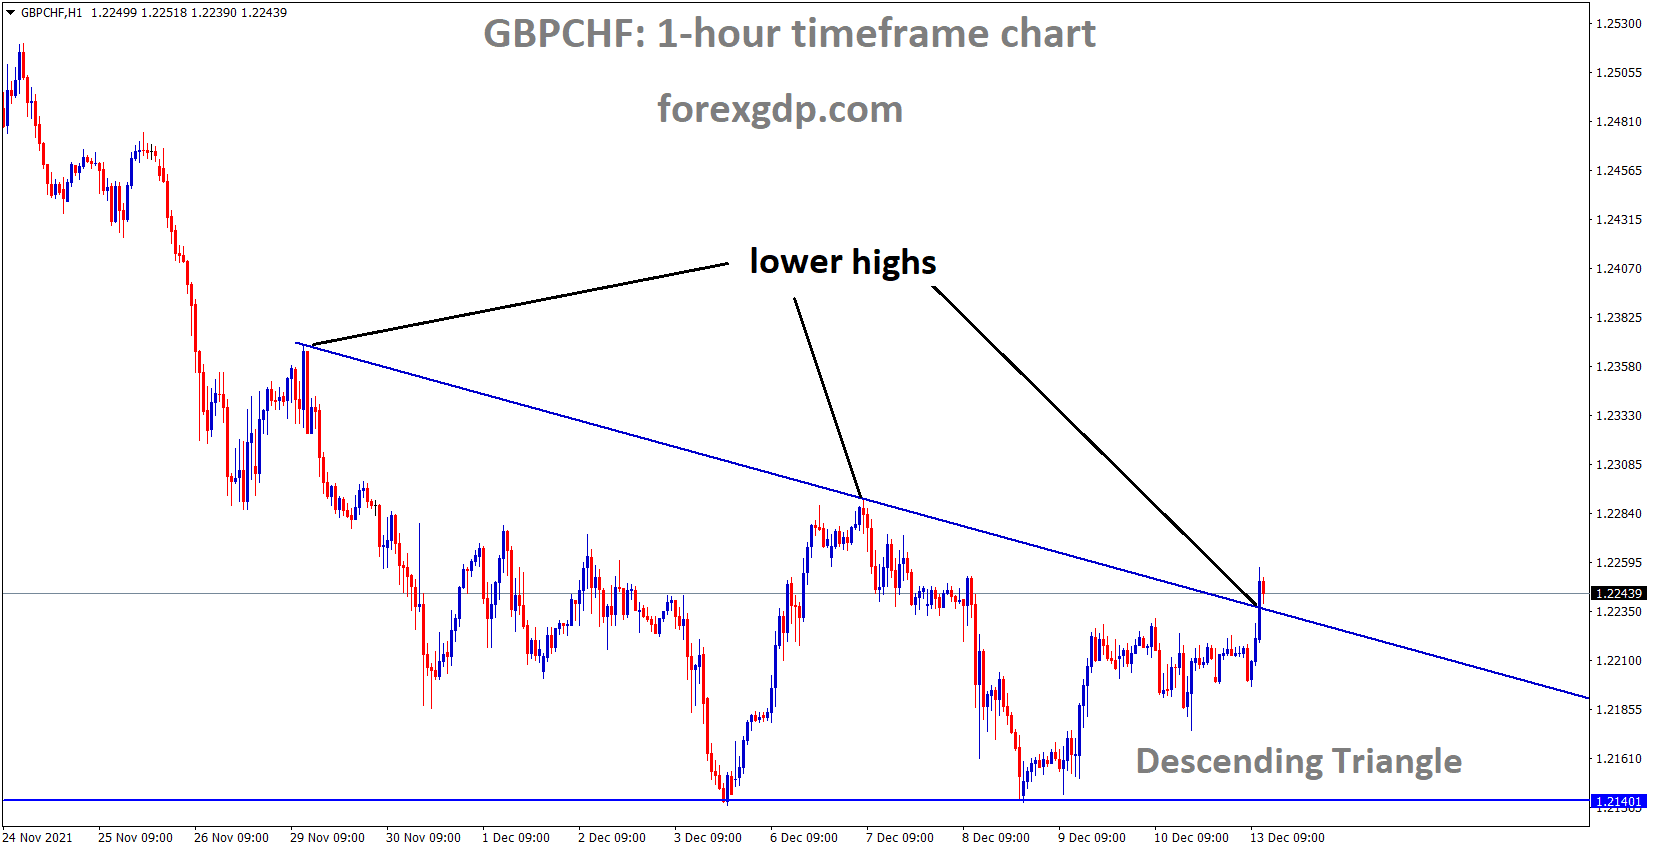 GBPCHF is moving in the Descending triangle pattern and the market has reached the lower high area of the triangle pattern